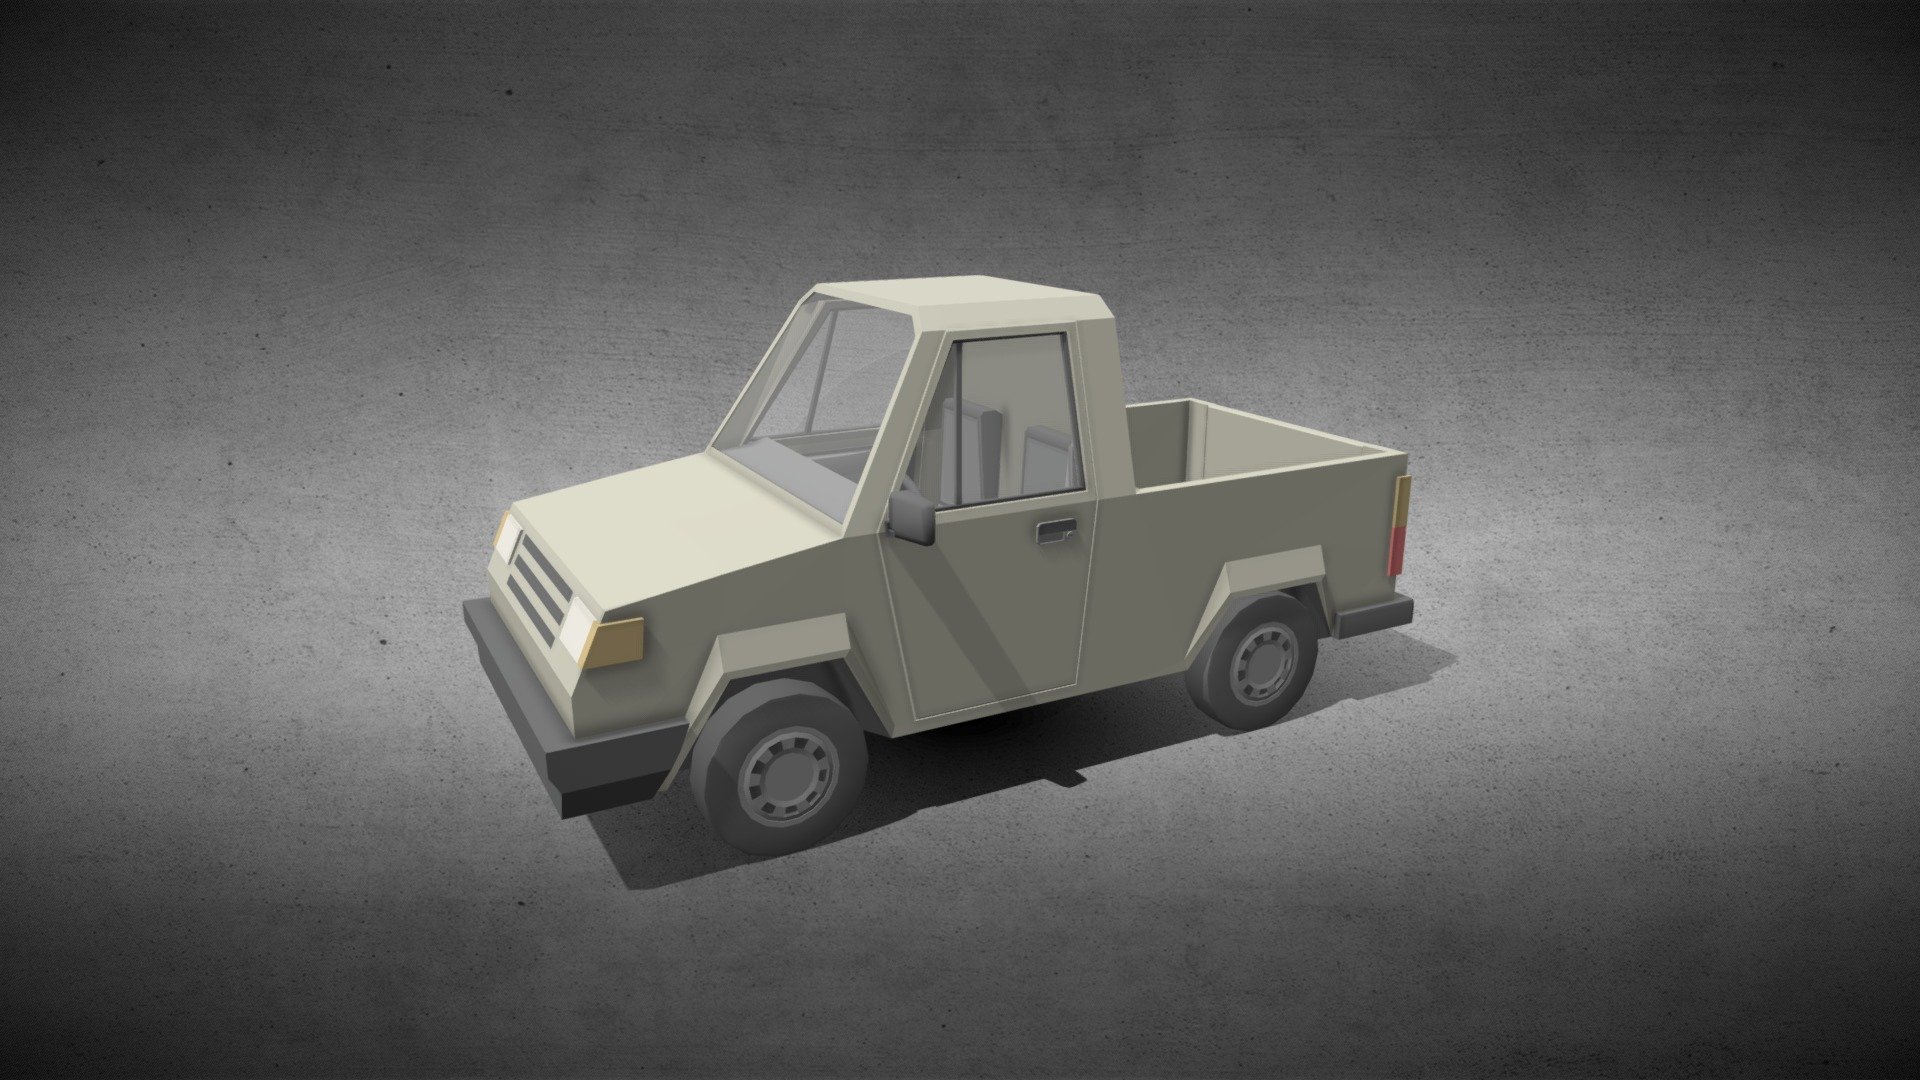 Low-Poly Pick-up car

Low-poly pick-up vehicle with interior and separate elements to allow animate easily. The wheels are separated from the rest of the model, the doors can be opened and the steering wheel is separated. The lights are independent elements (Headlights, Taillights and direction indicators)


If you like this model, Check more models on my dashboard:



  
Low-Poly Compact car
  
Low-Poly Wagon car
  
Low-Poly Sedan car
  
Low-Poly Minibus
  
Low-Poly Van car
  
Low-Poly 4x4 Car
  
Low-Poly Delivery van Car
   - Low-Poly Pick-up car - Buy Royalty Free 3D model by scailman 3d model